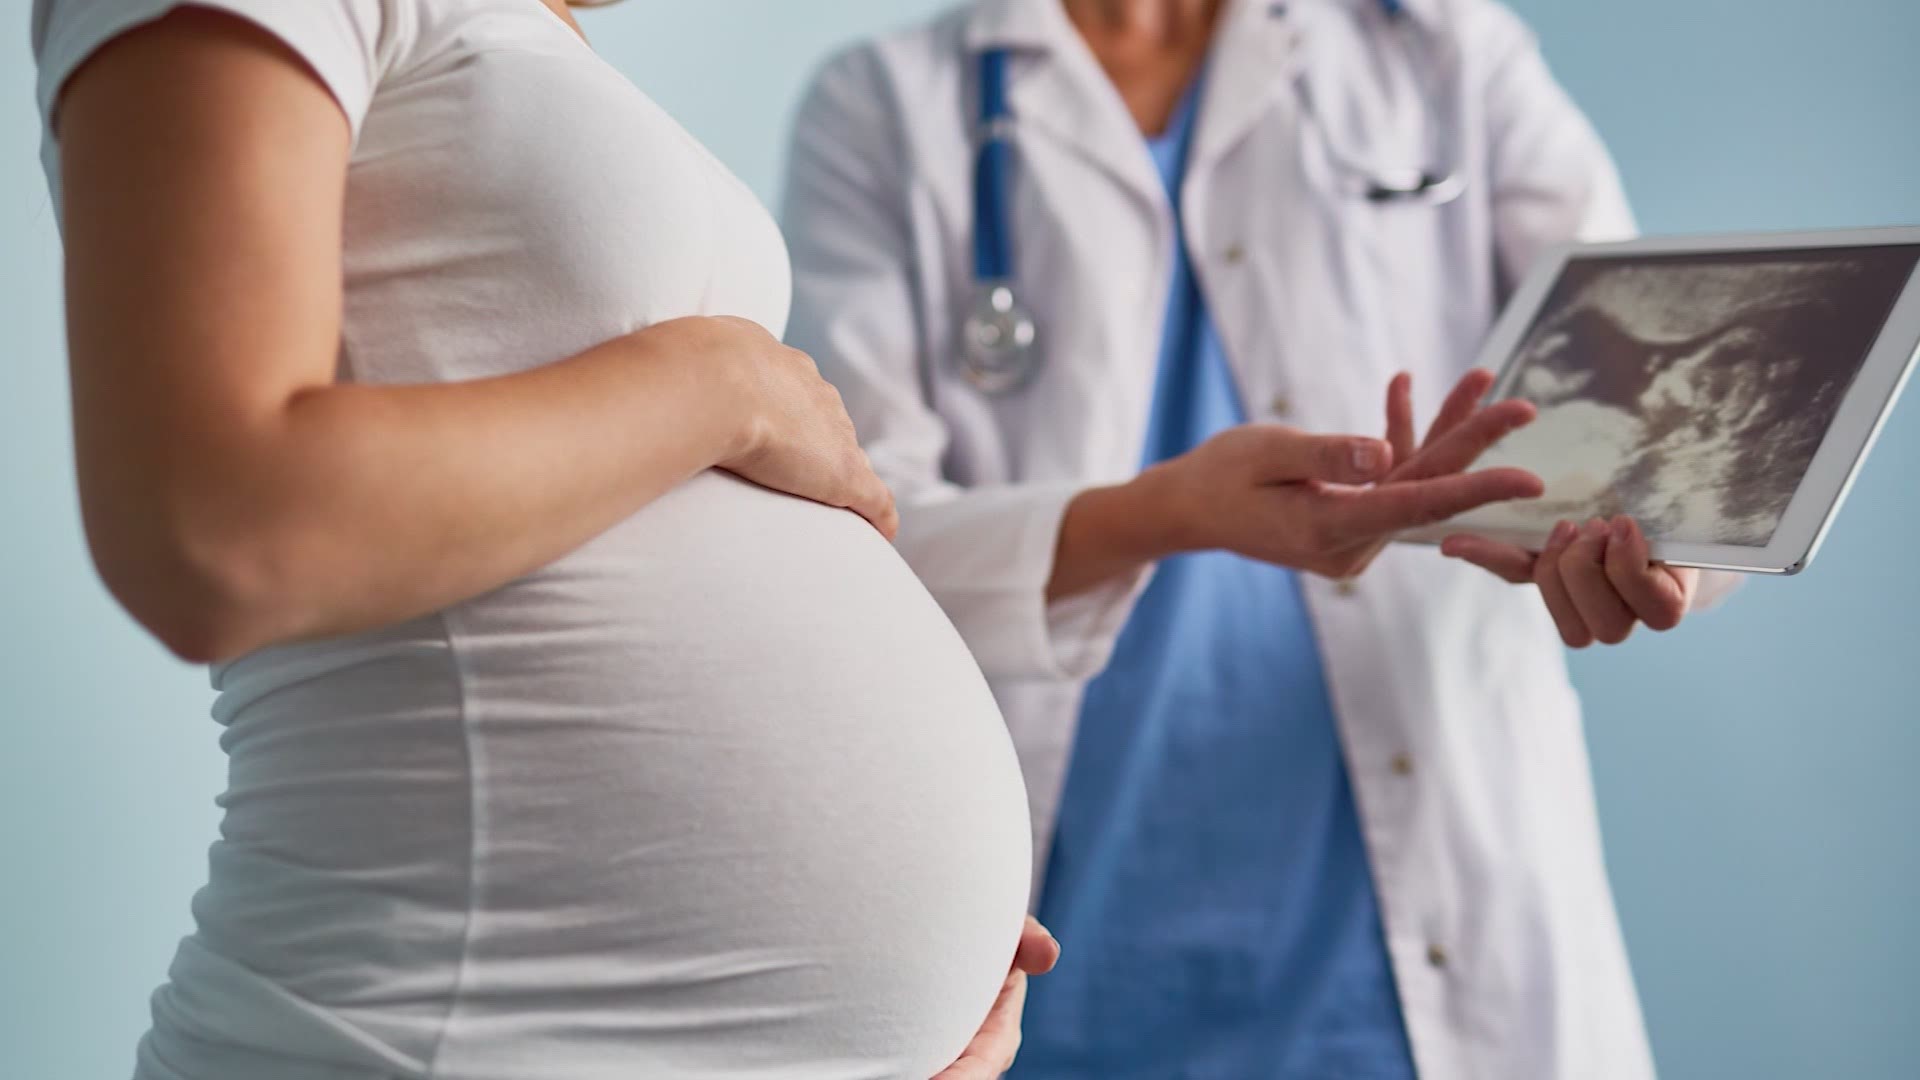 A UTHealth study found pregnant women hospitalized with COVID-19 have less than a 1% chance of dying. Women who were not pregnant had a 3.5% risk of death.